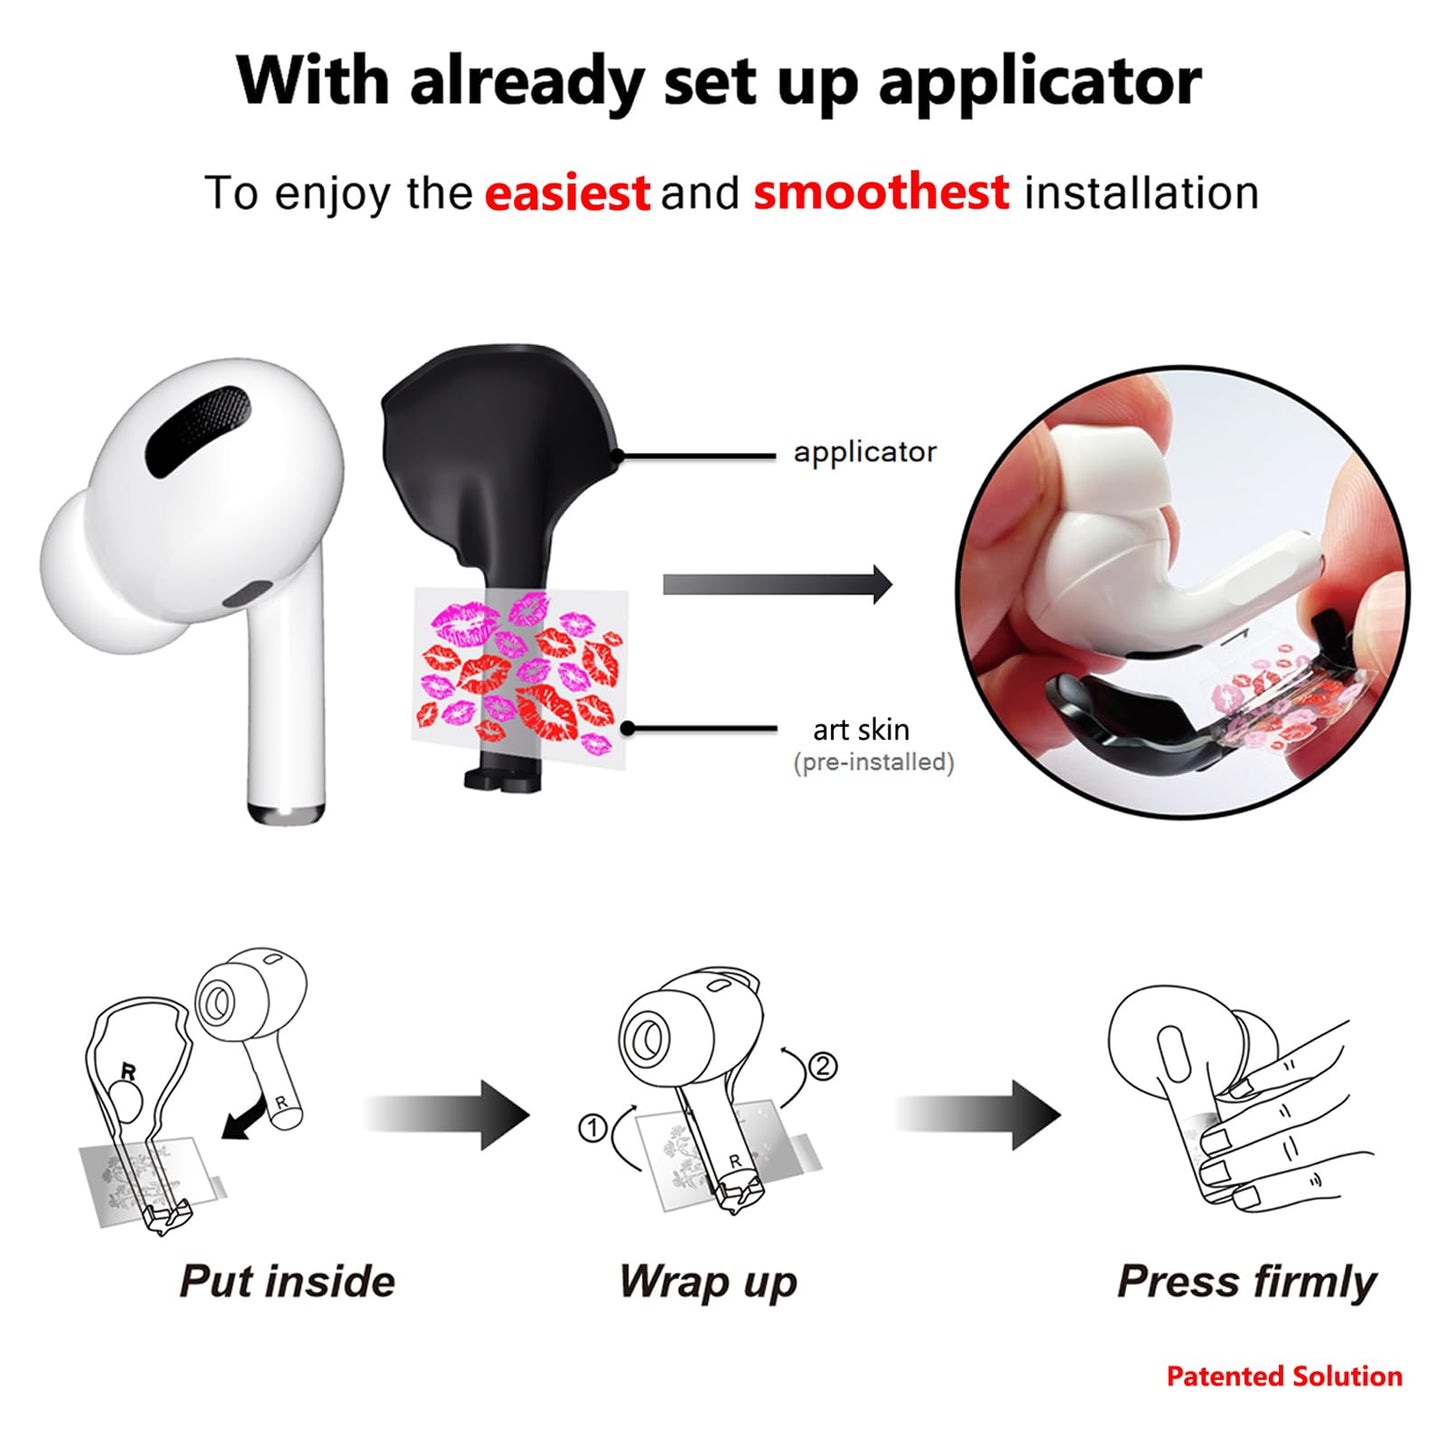 ROCKMAX for Pink AirPods Pro Skin Accessories, Finger Heart Sticker Wrap for Women and Girls, Thin Tattoos Compatible to AirPods Pro 2nd Generation Case Cover, Ear Buds Decal with Cleaning Kit